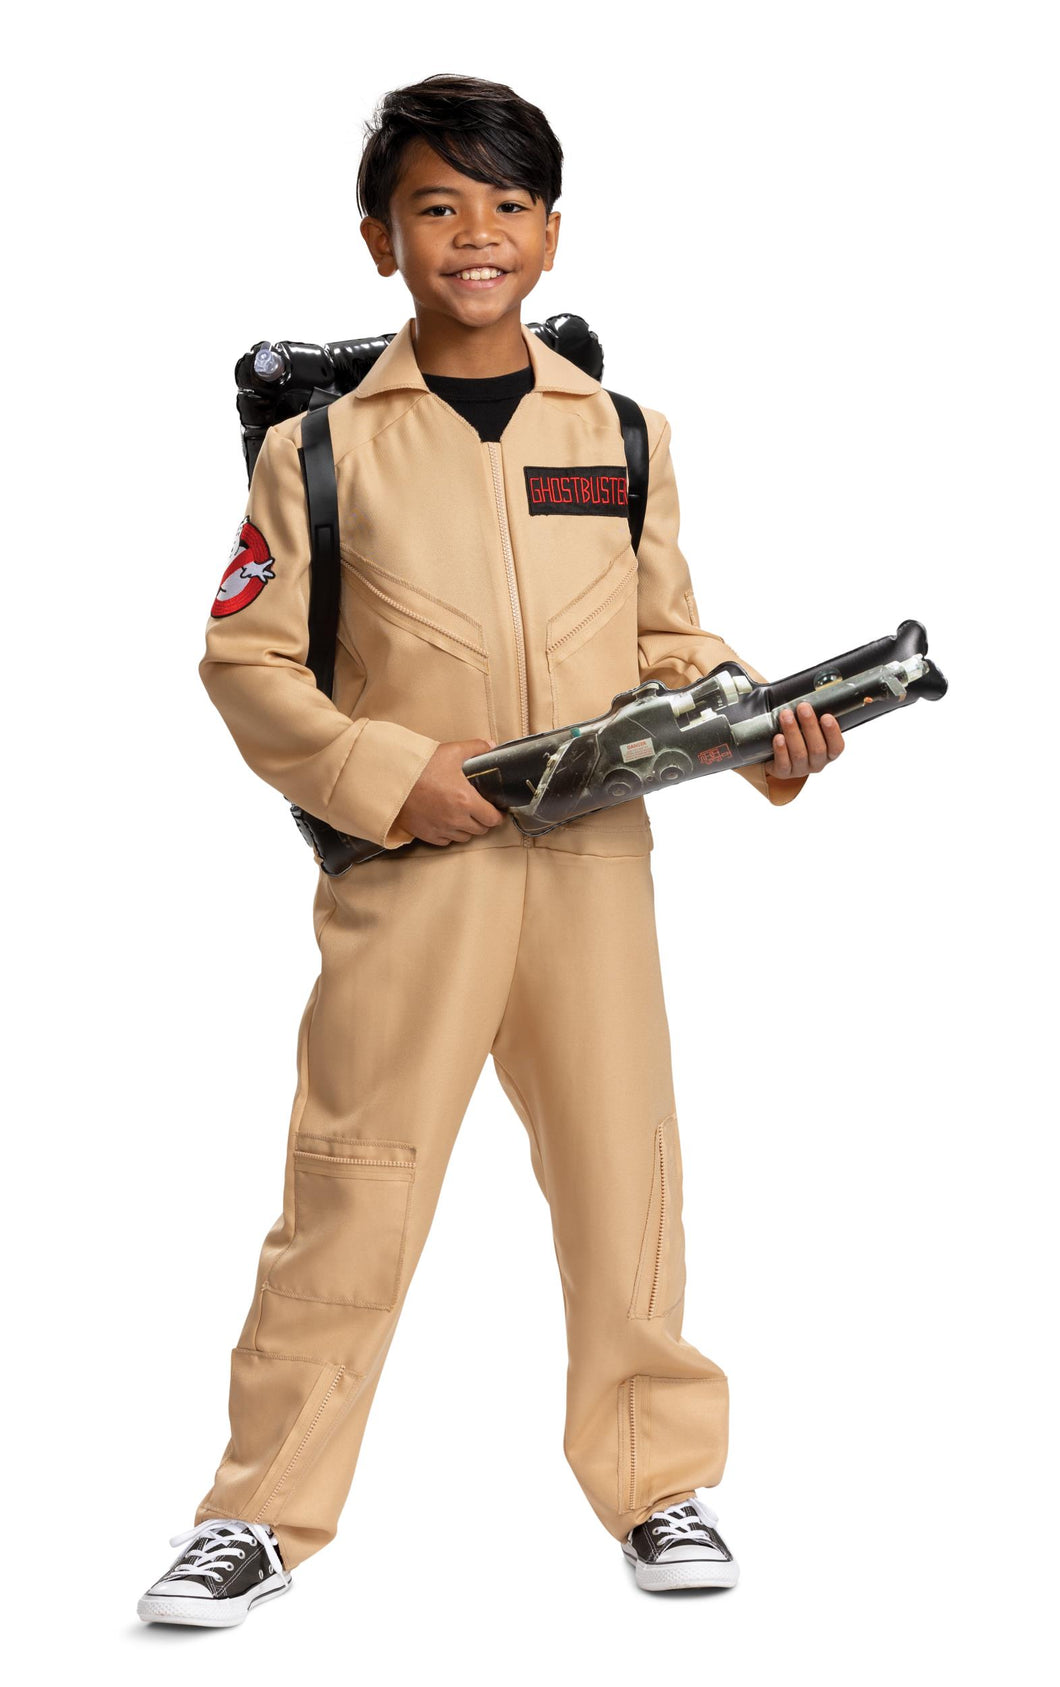 Ghostbusters Jumpsuit with Proton Pack Child Costume Large 10-12